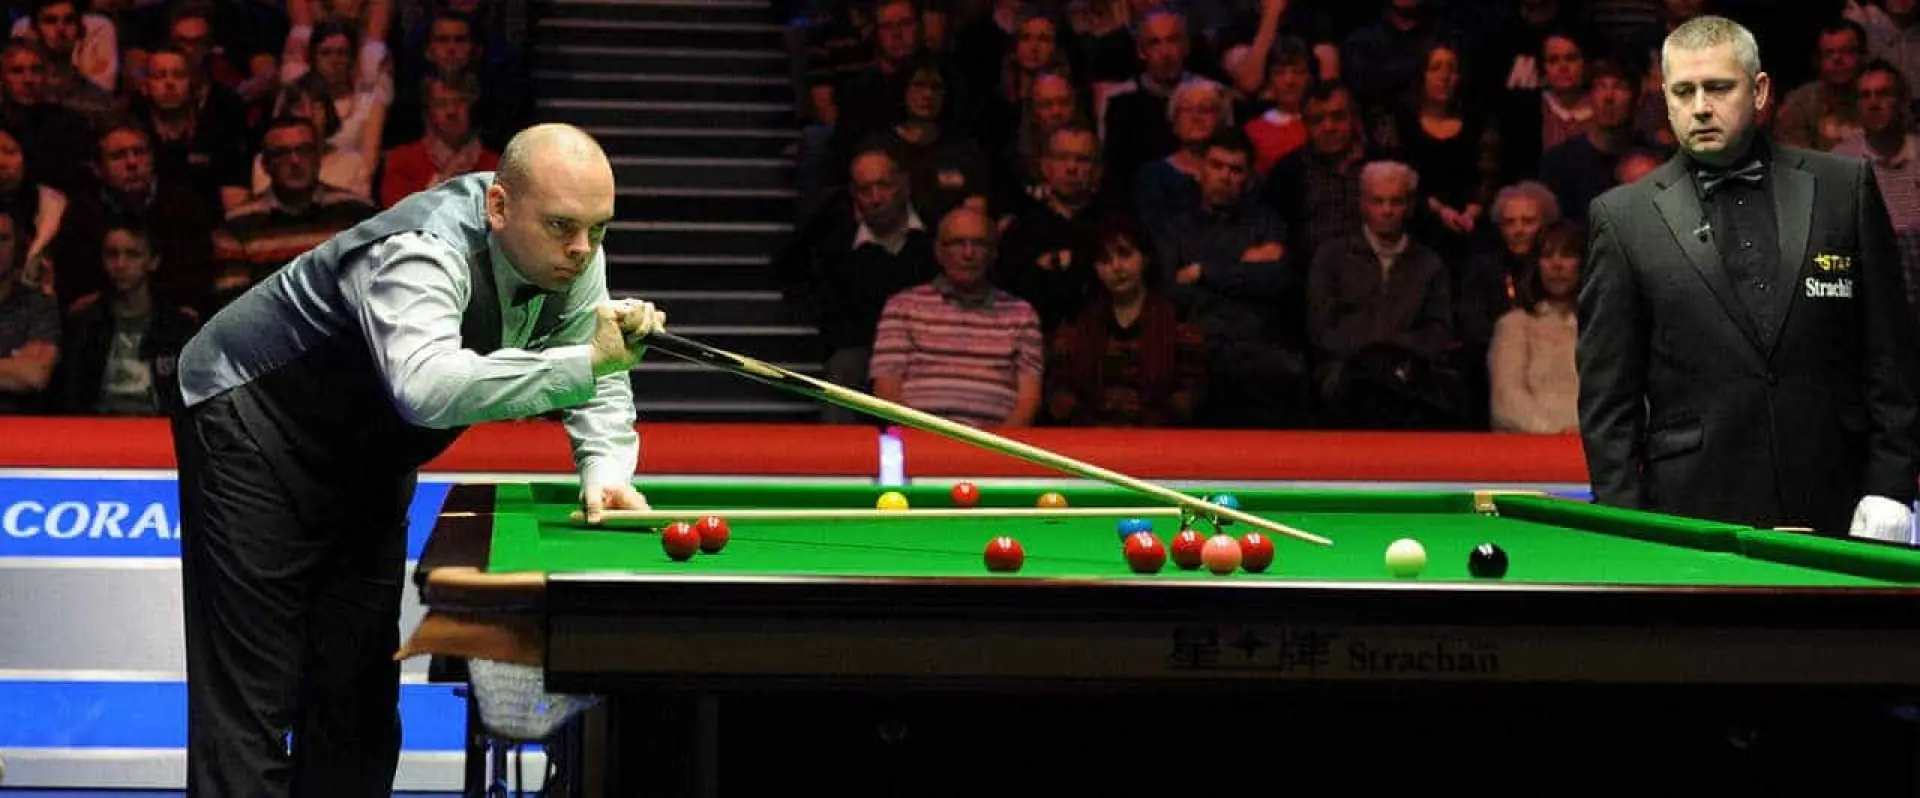 Stuart Bingham odds feature among Coral English Open day 1 tips, alongside a sevenfoold acca on the snooker.